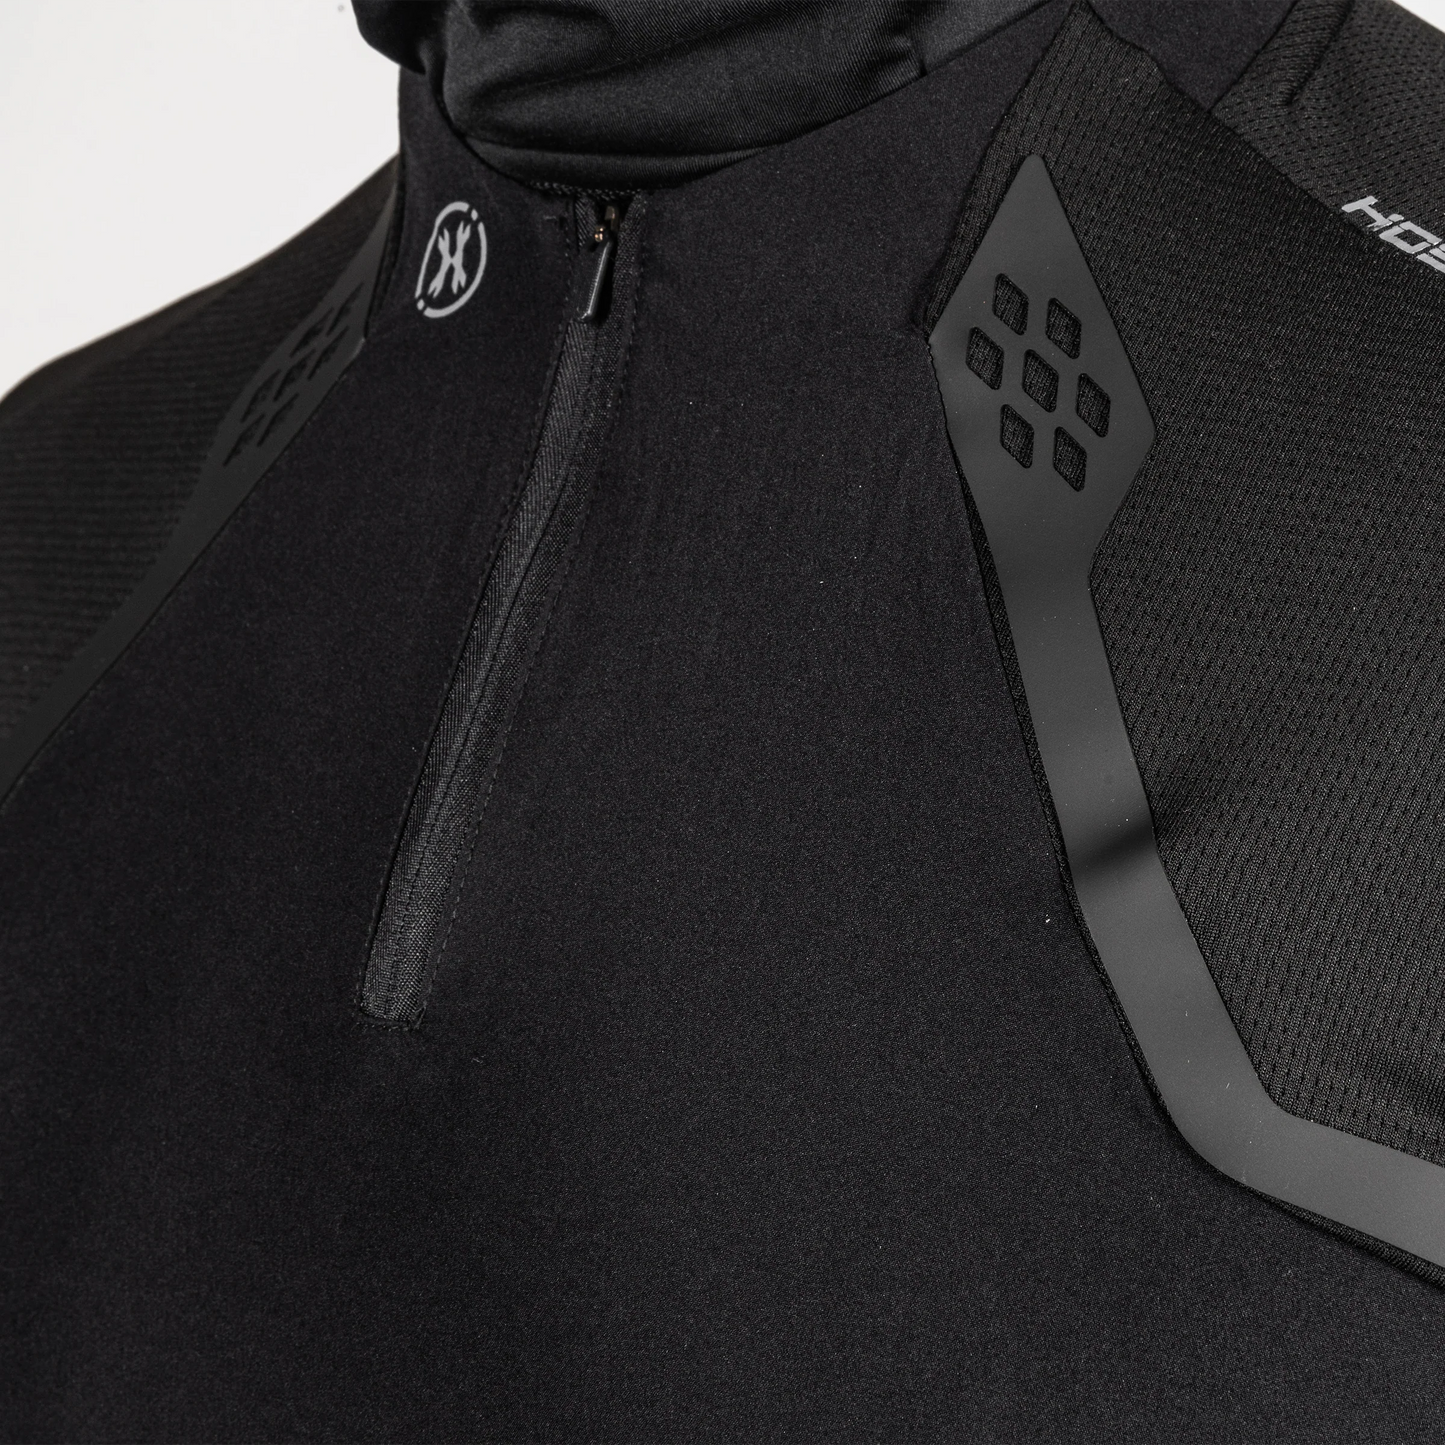 RECON JERSEY - STEALTH